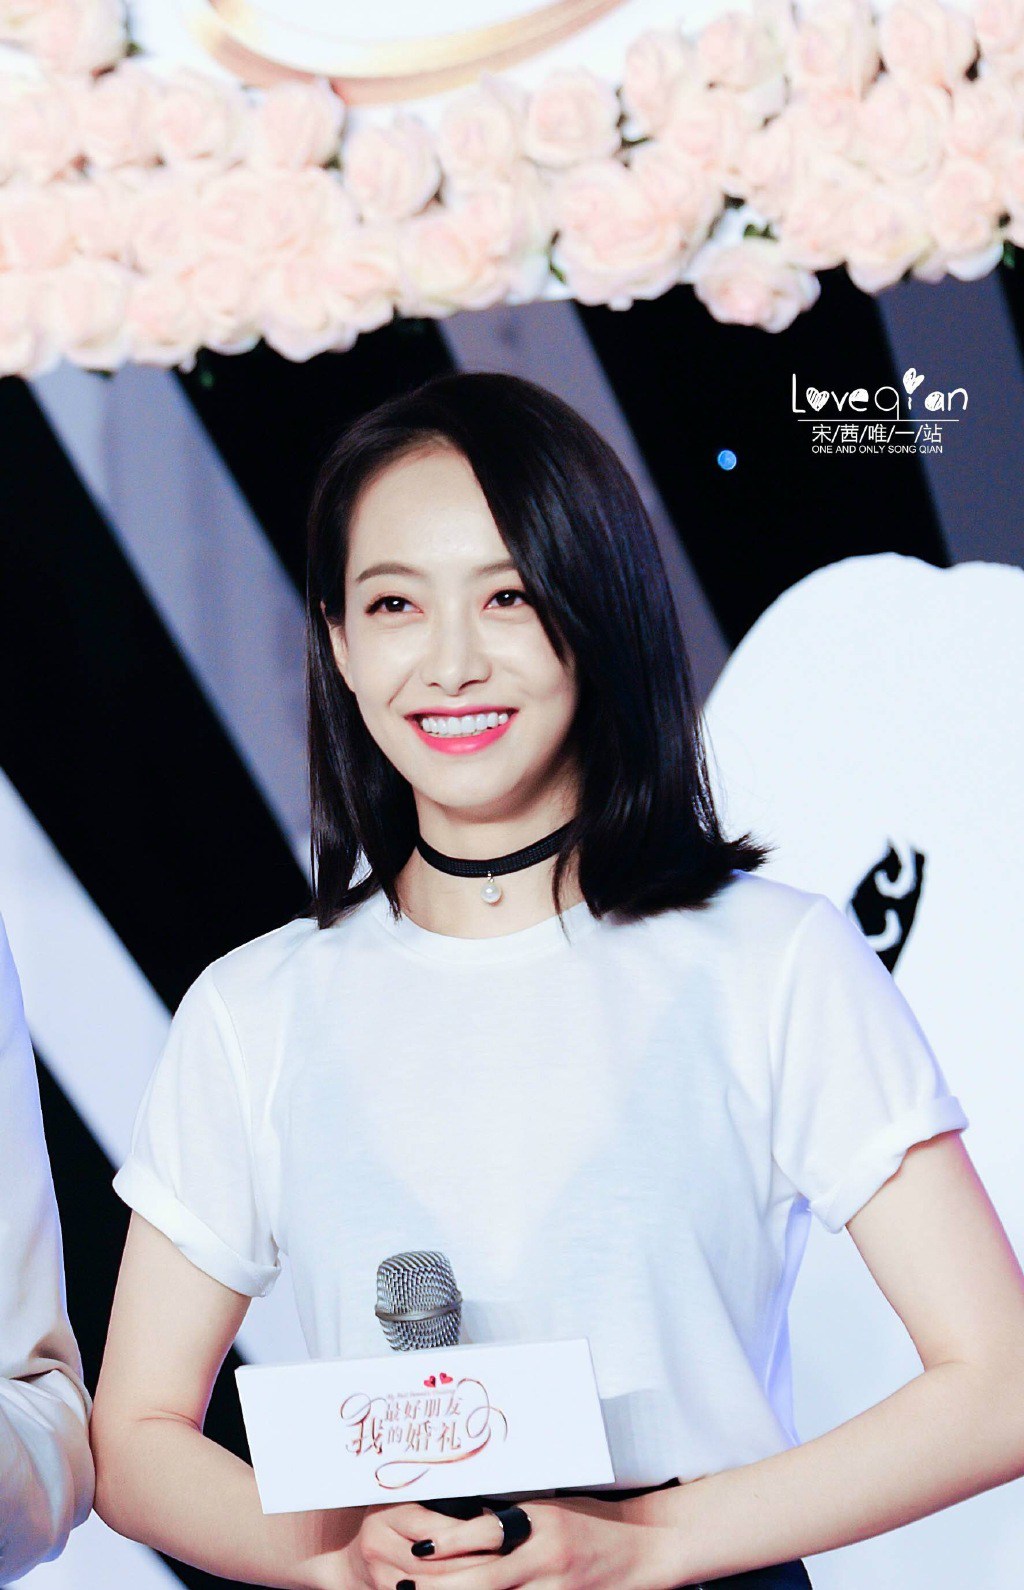 Victoria Song, Android IPhone Wallpaper. KPOP JPOP Image Board